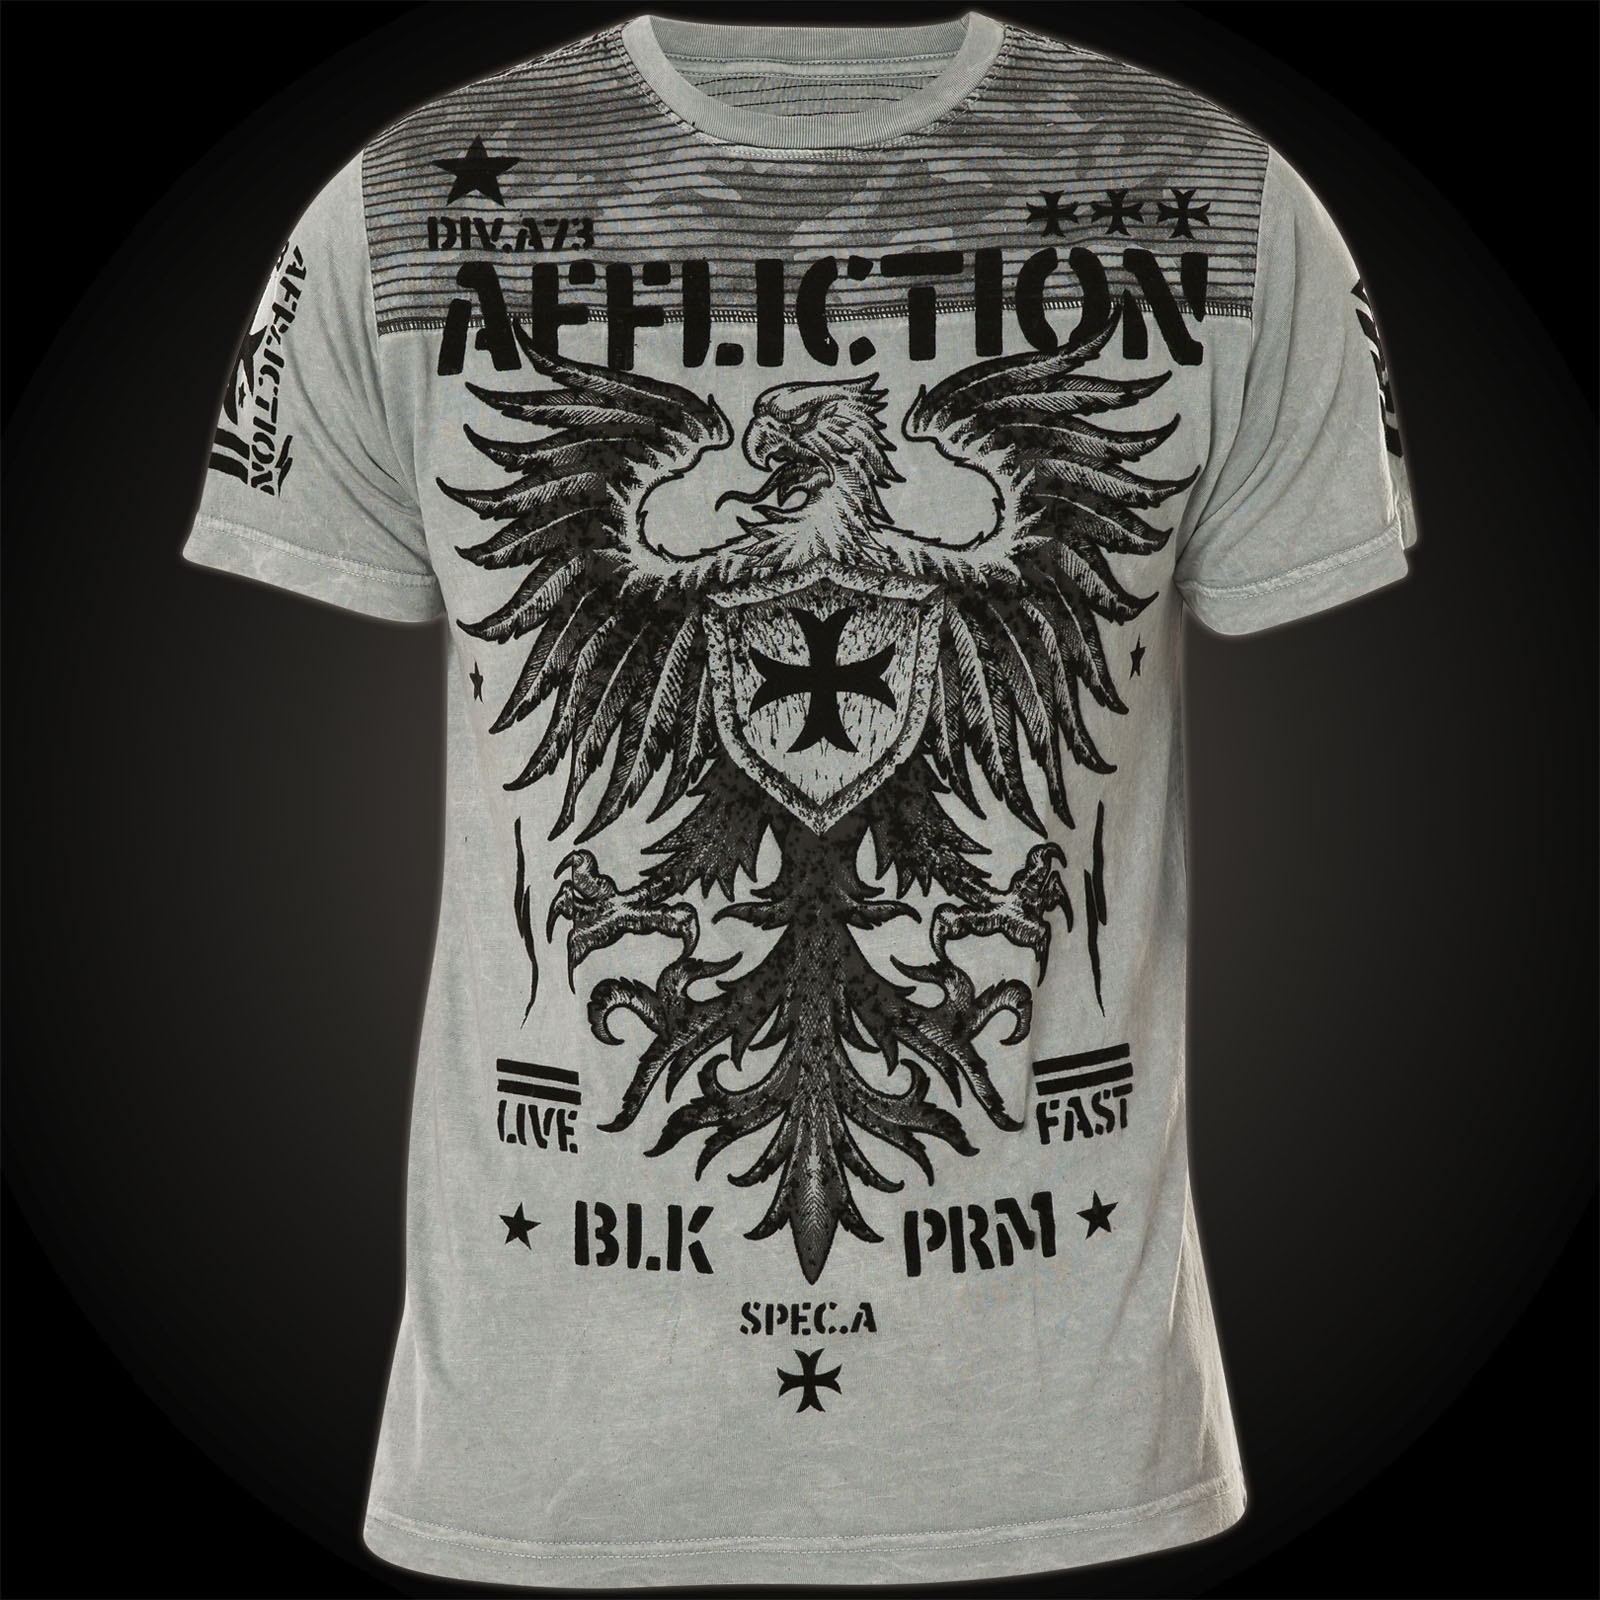 Affliction Full Value - T-Shirt with a large bird of prey